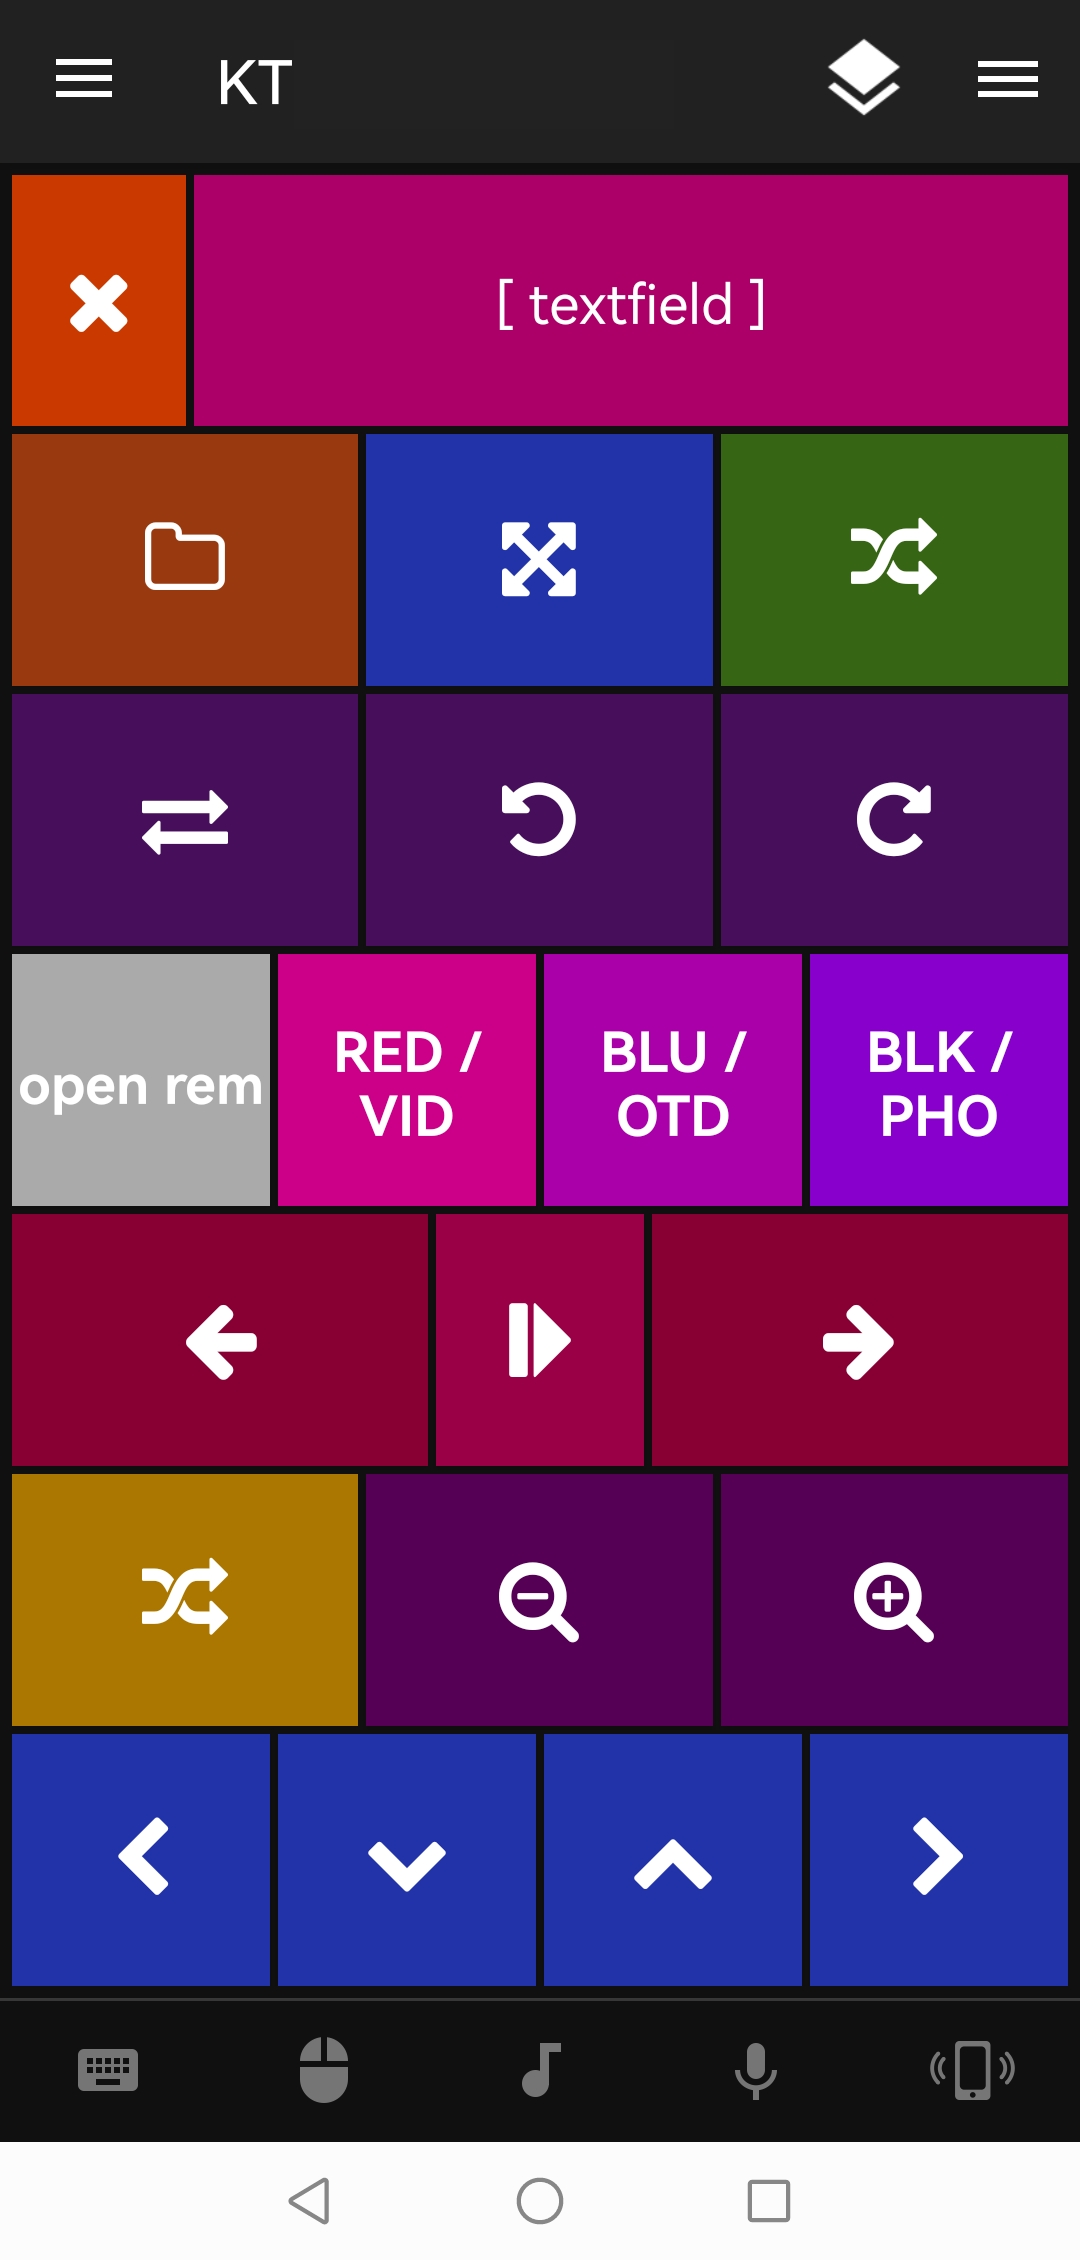 20221201_0134_open_remote_button.png